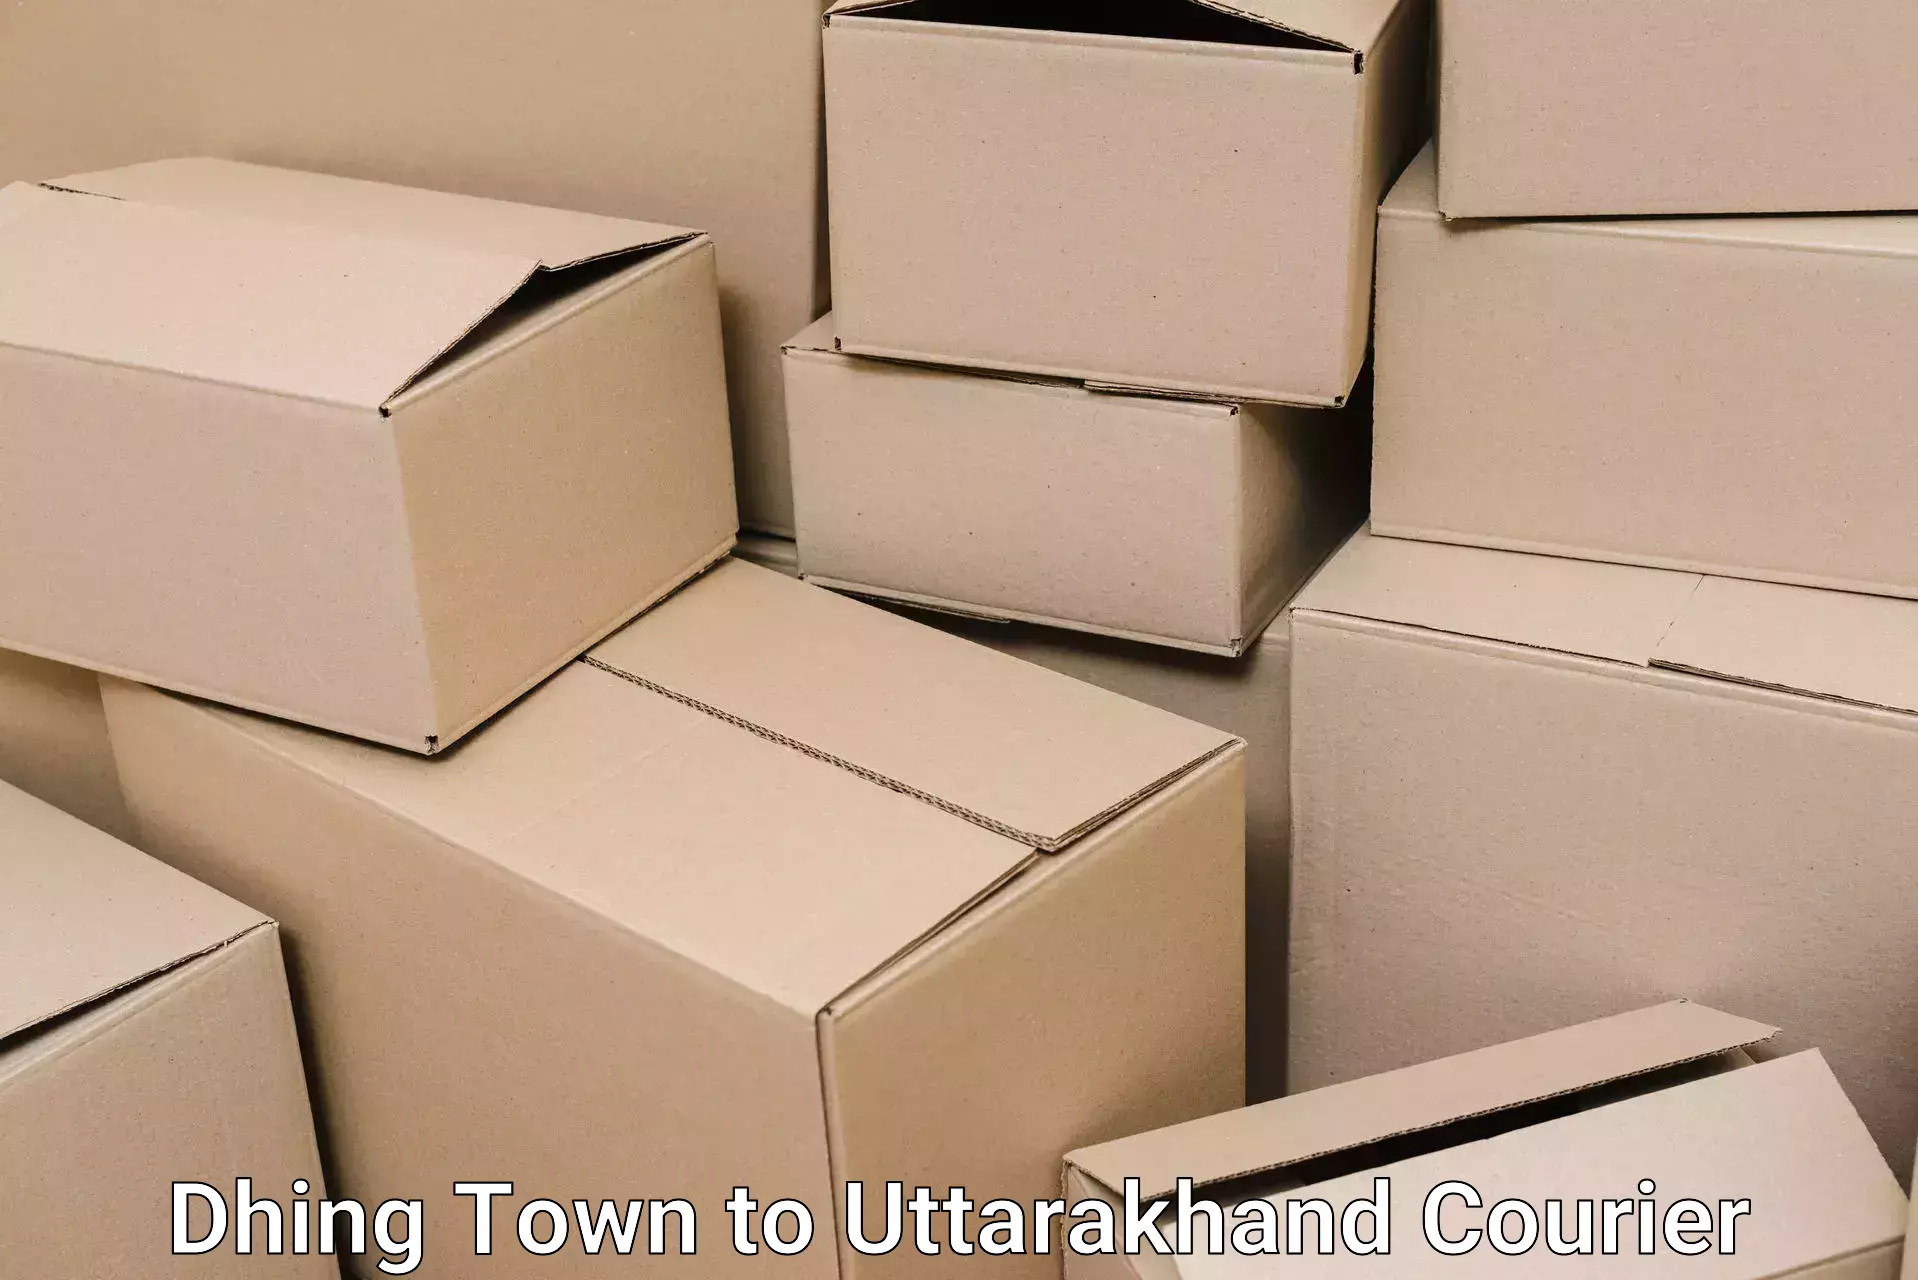 Furniture transport specialists Dhing Town to Rishikesh